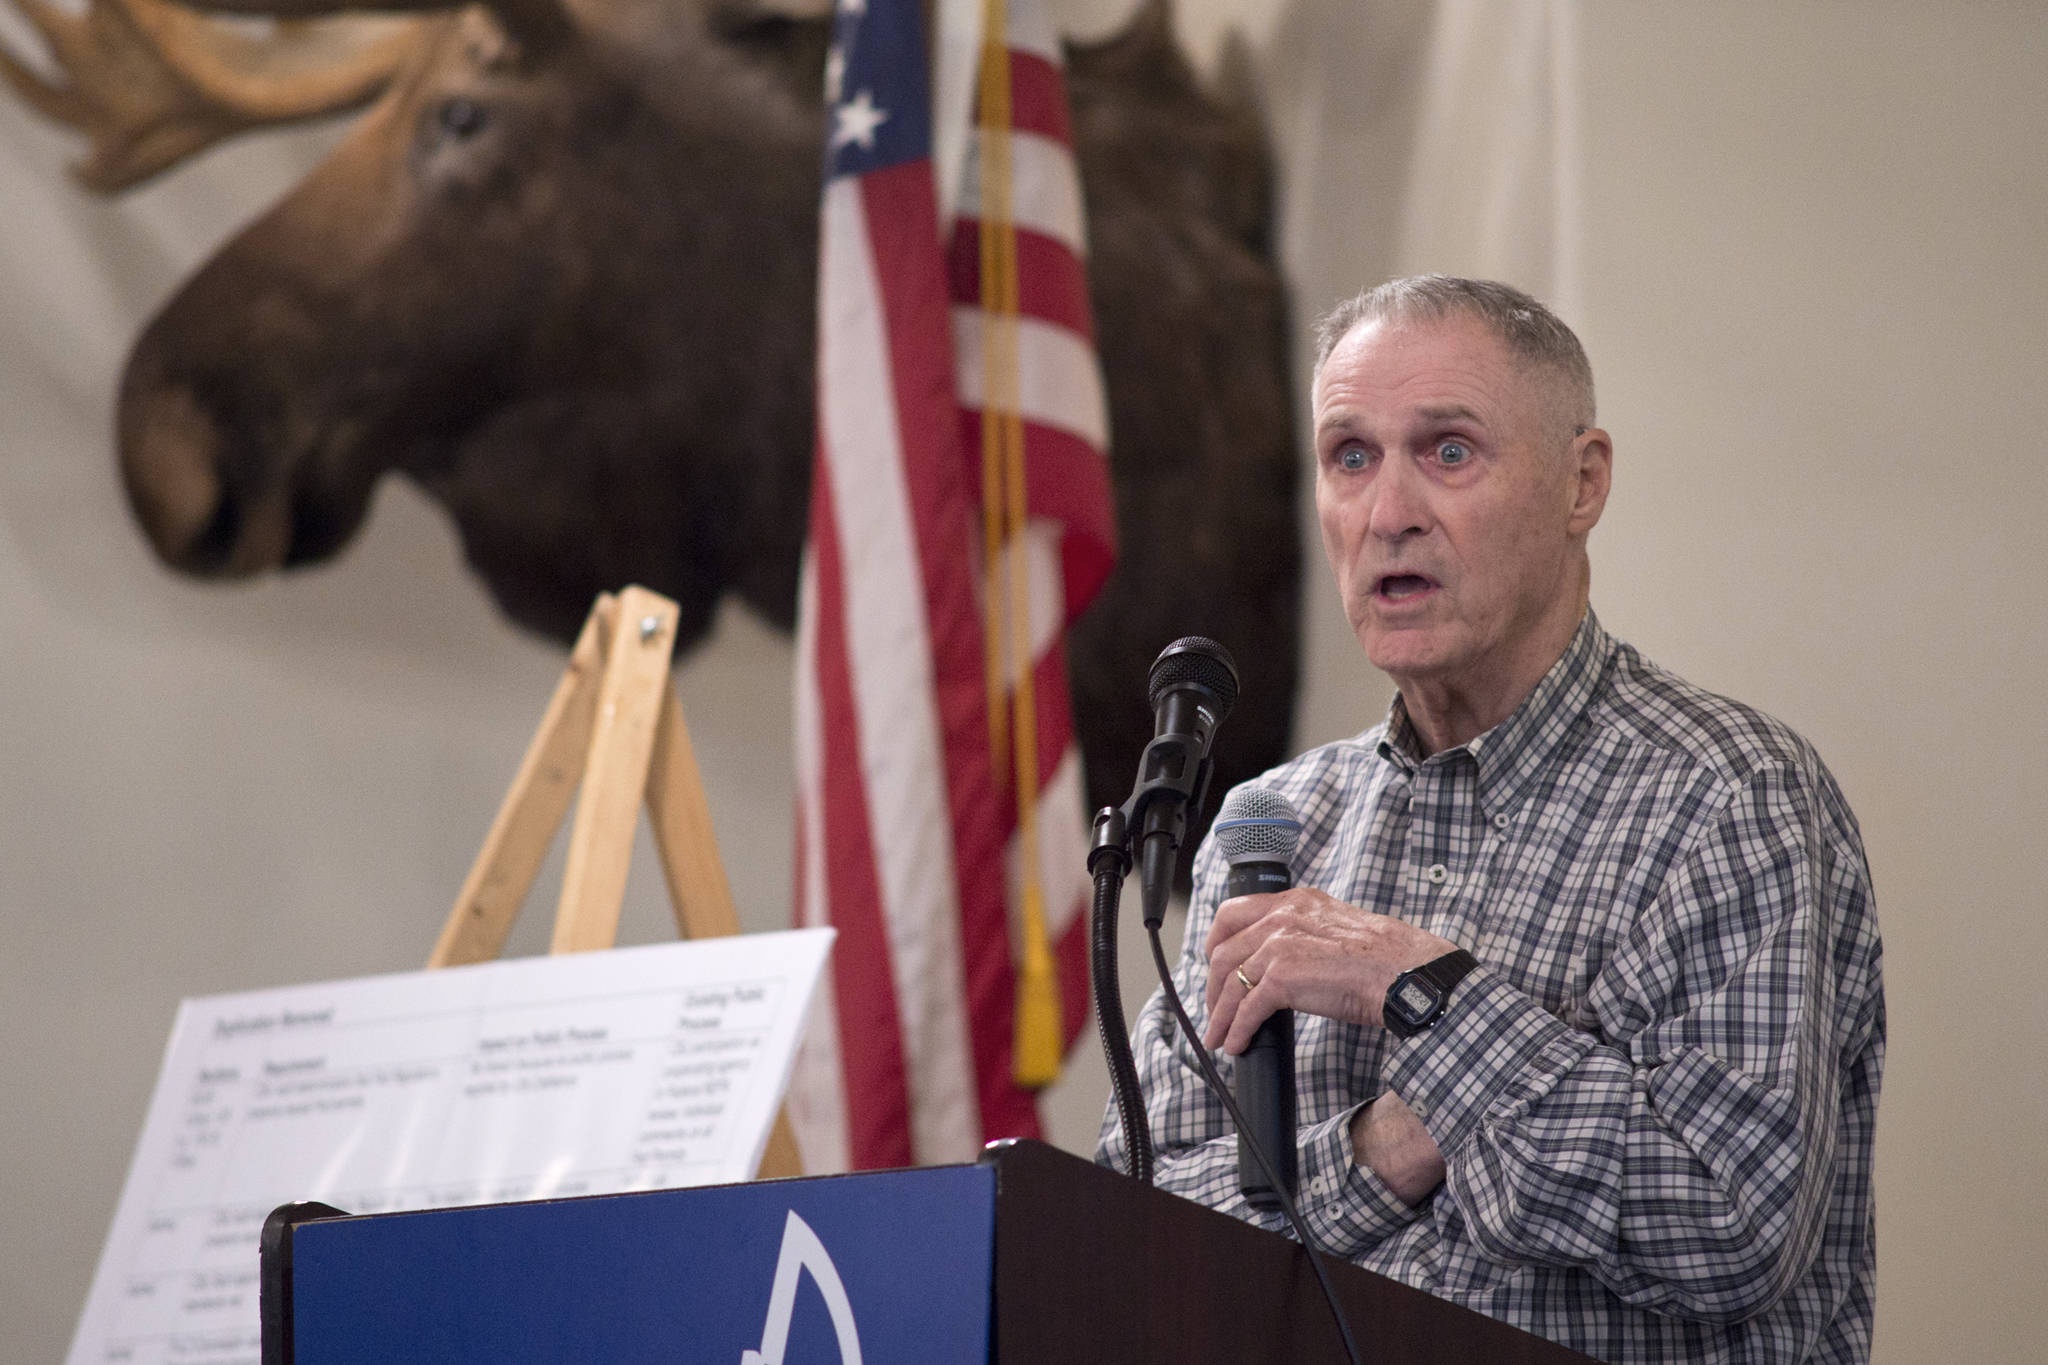 Long-time resident and local businessman Bill Corbus speaks to the Juneau Chamber of Commerce during their weekly luncheon in May 2017. Corbus will speak to the chamber about taxing the oil industry. (Michael Penn | Juneau Empire File)